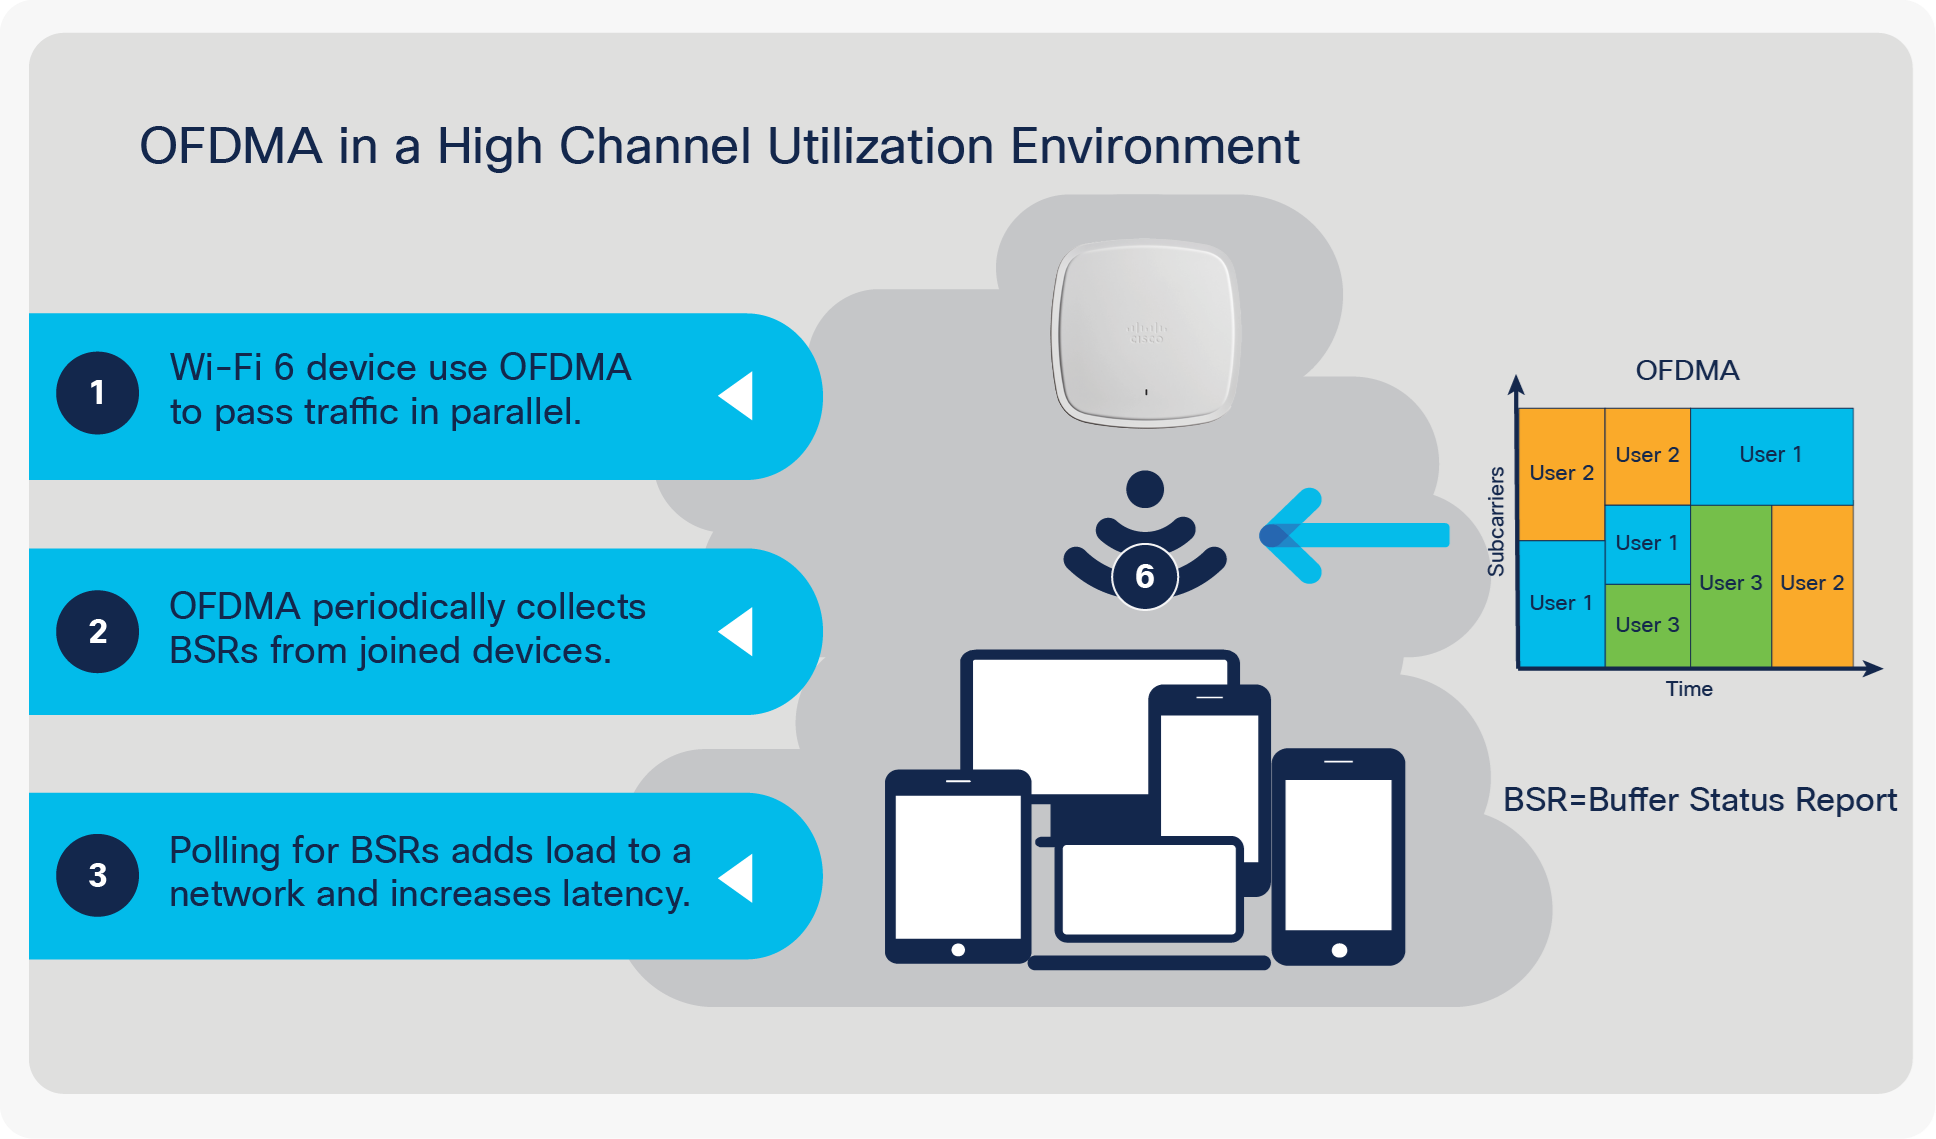 Limitations of OFDMA in a high channel utilization environment